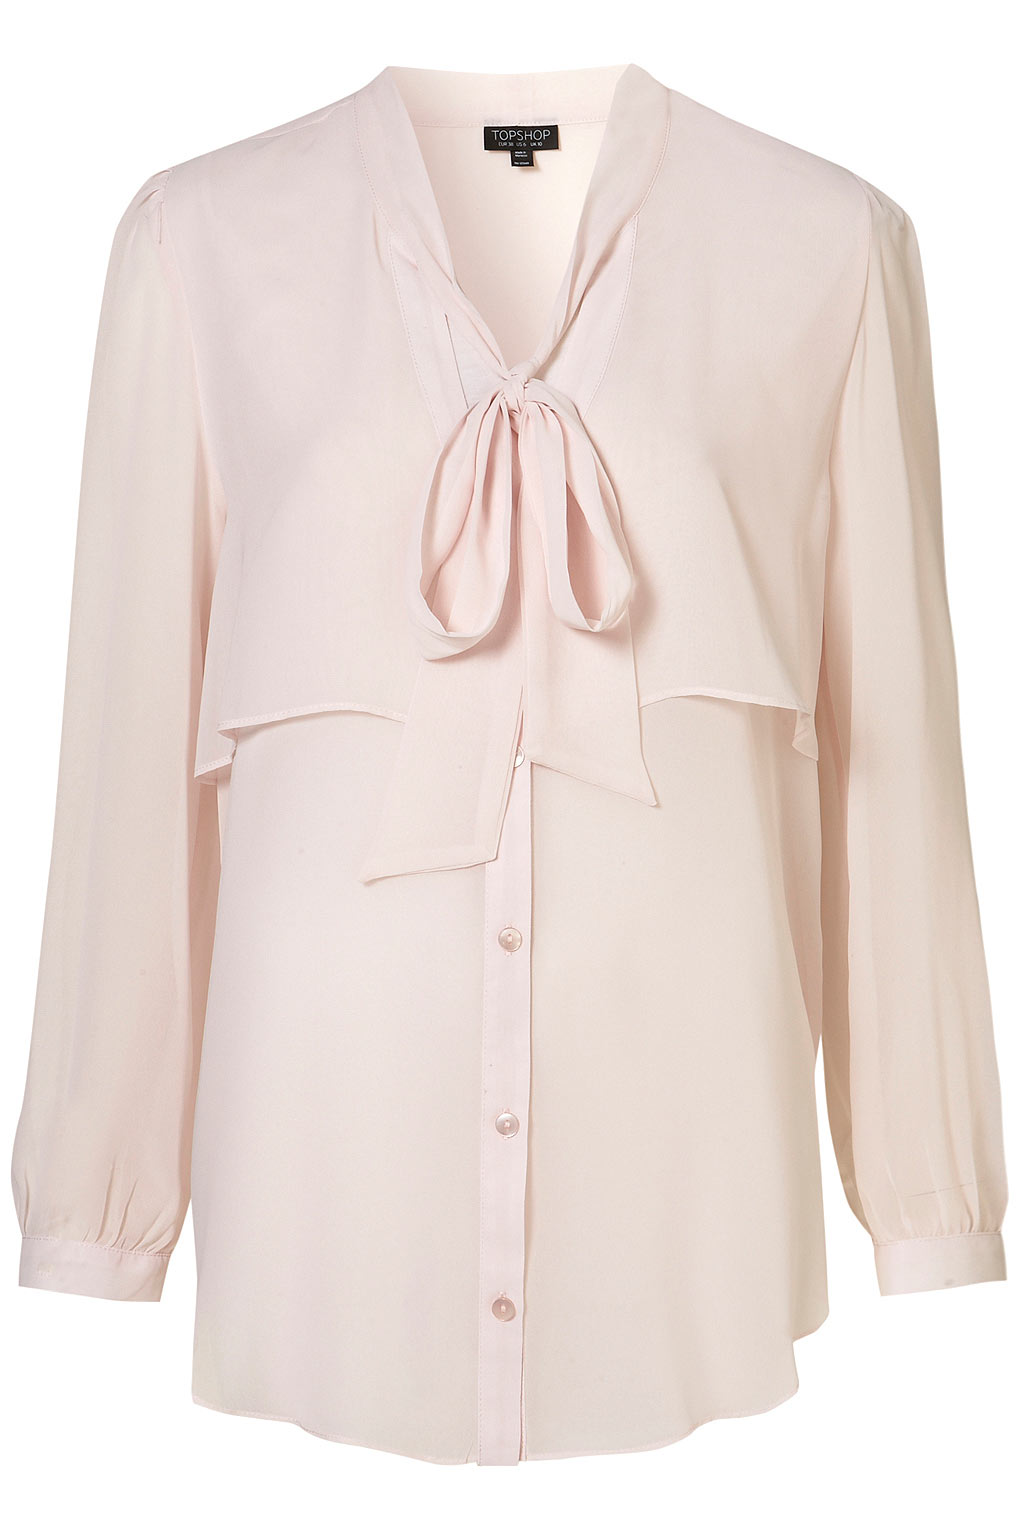 Lyst Topshop Double Layer Pussybow Blouse In Pink